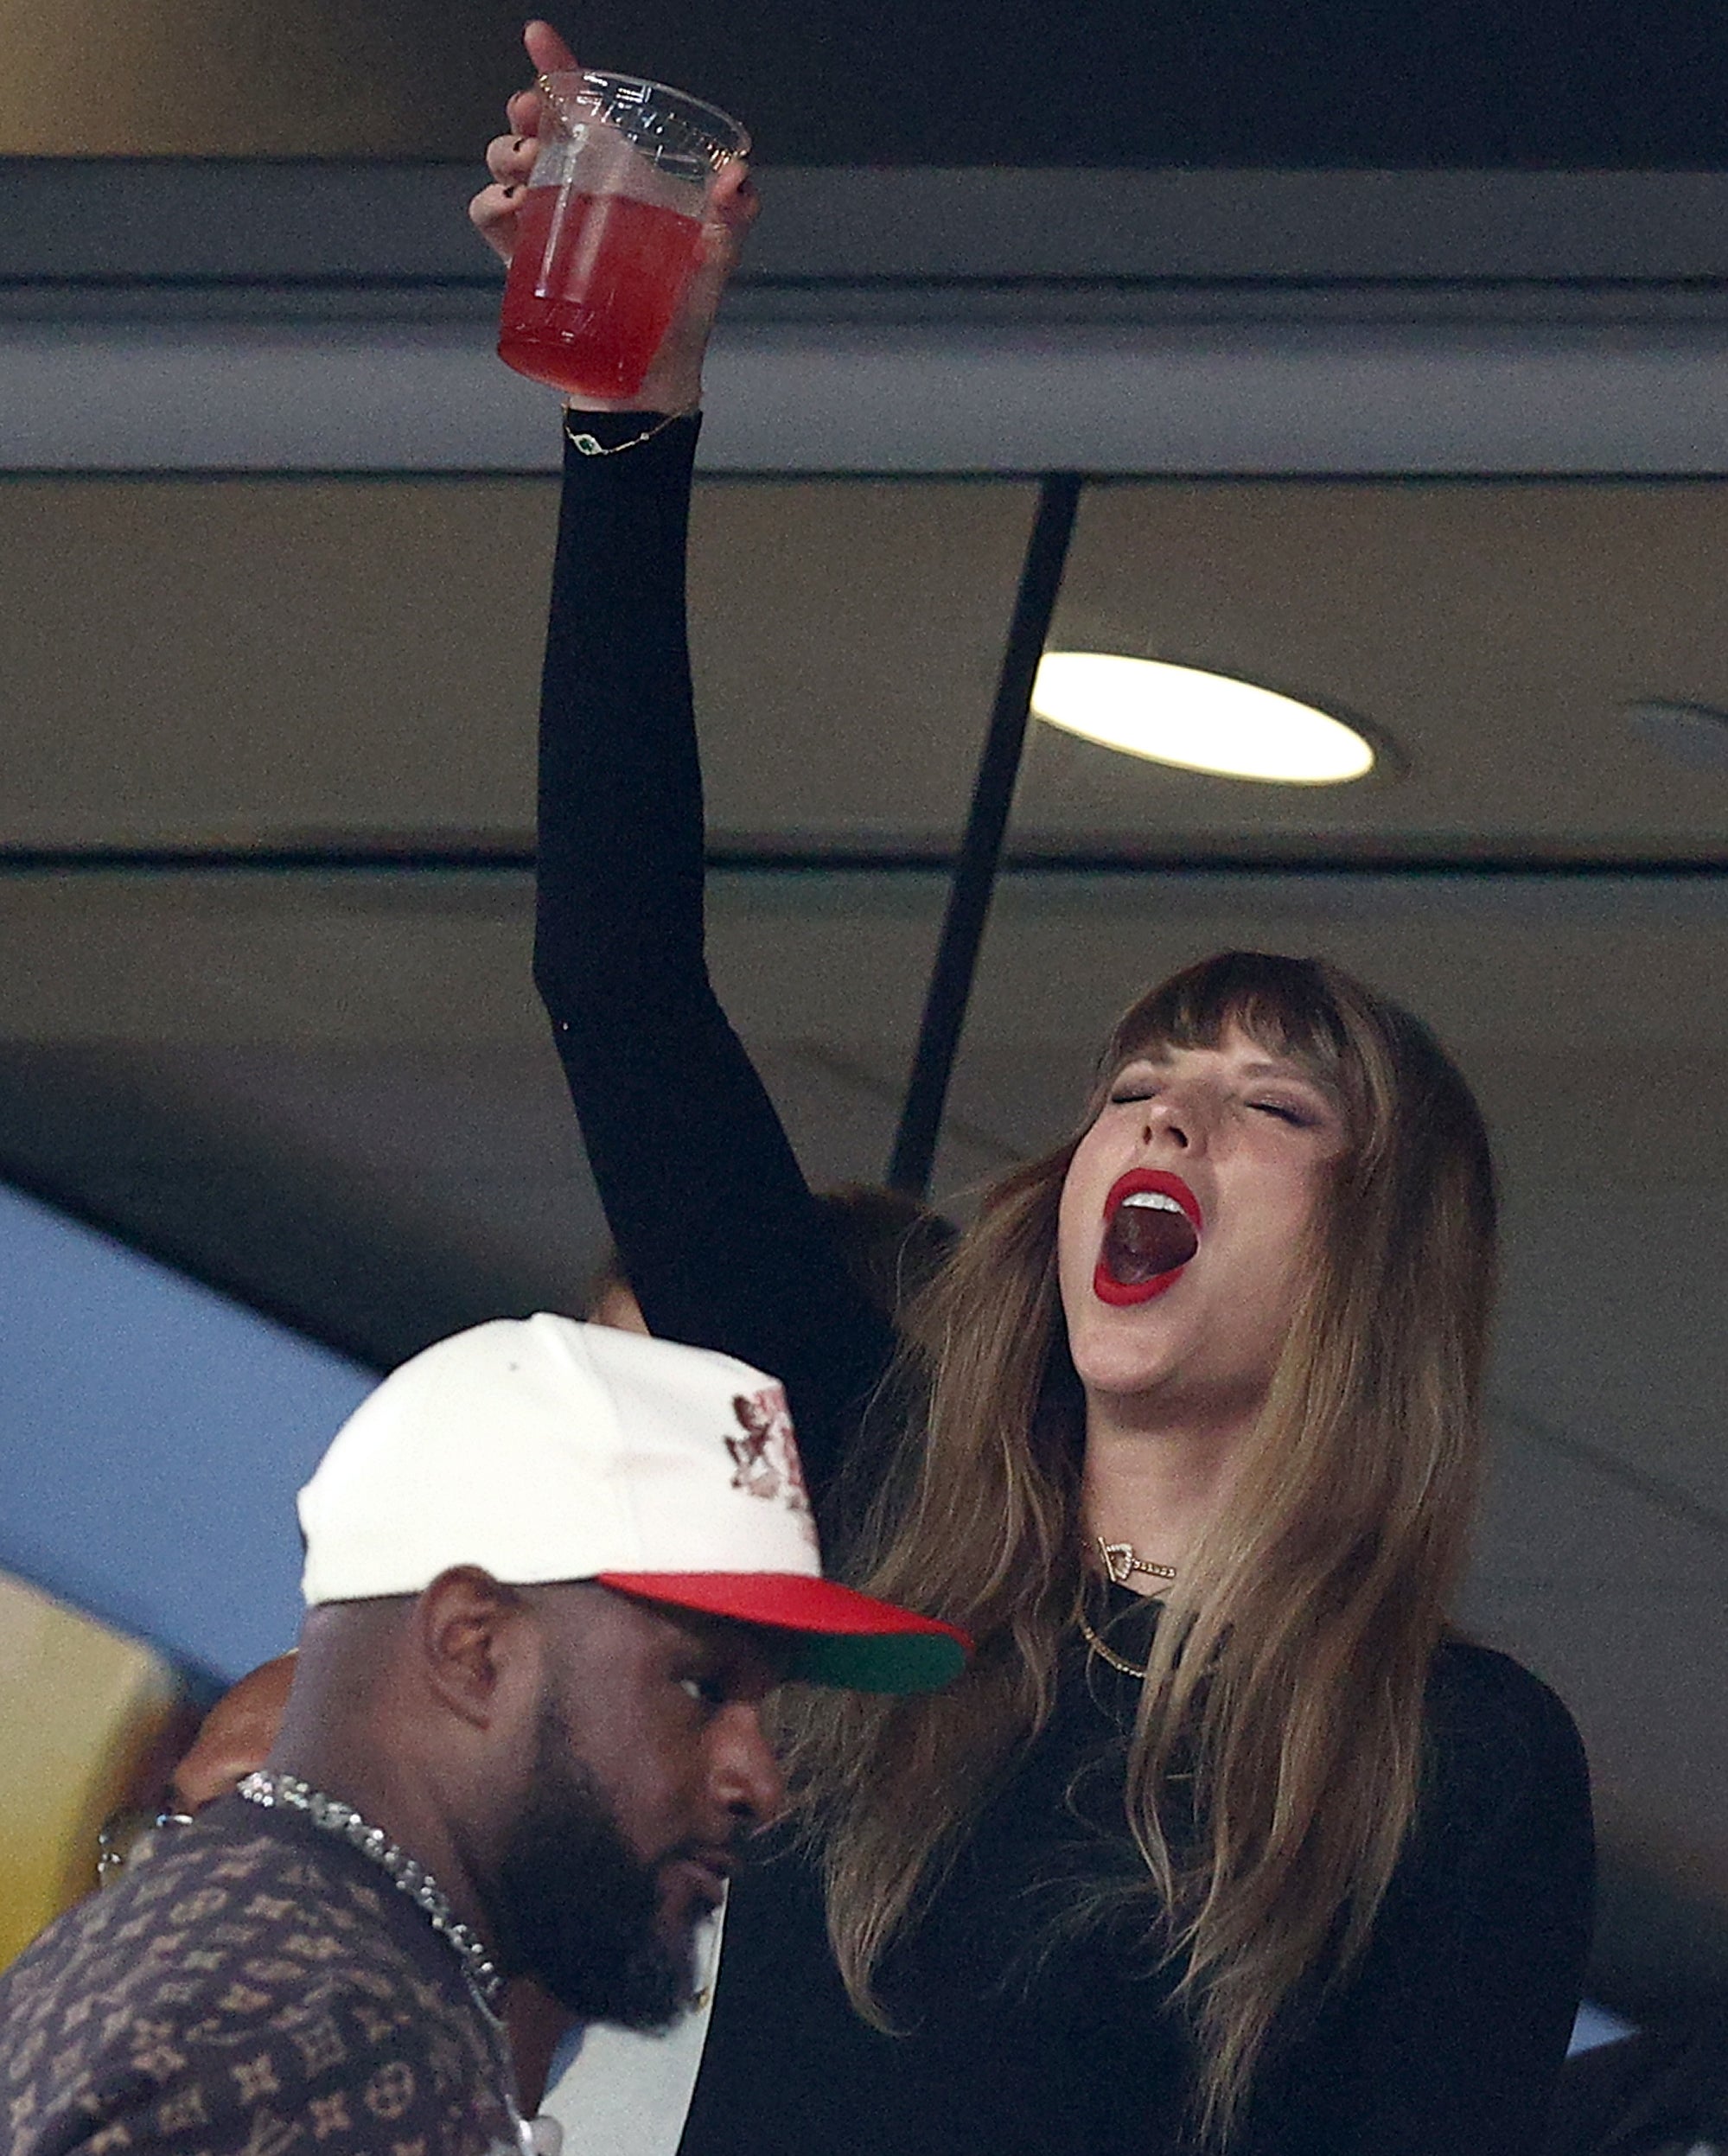 taylor cheering and putting a drink in the air